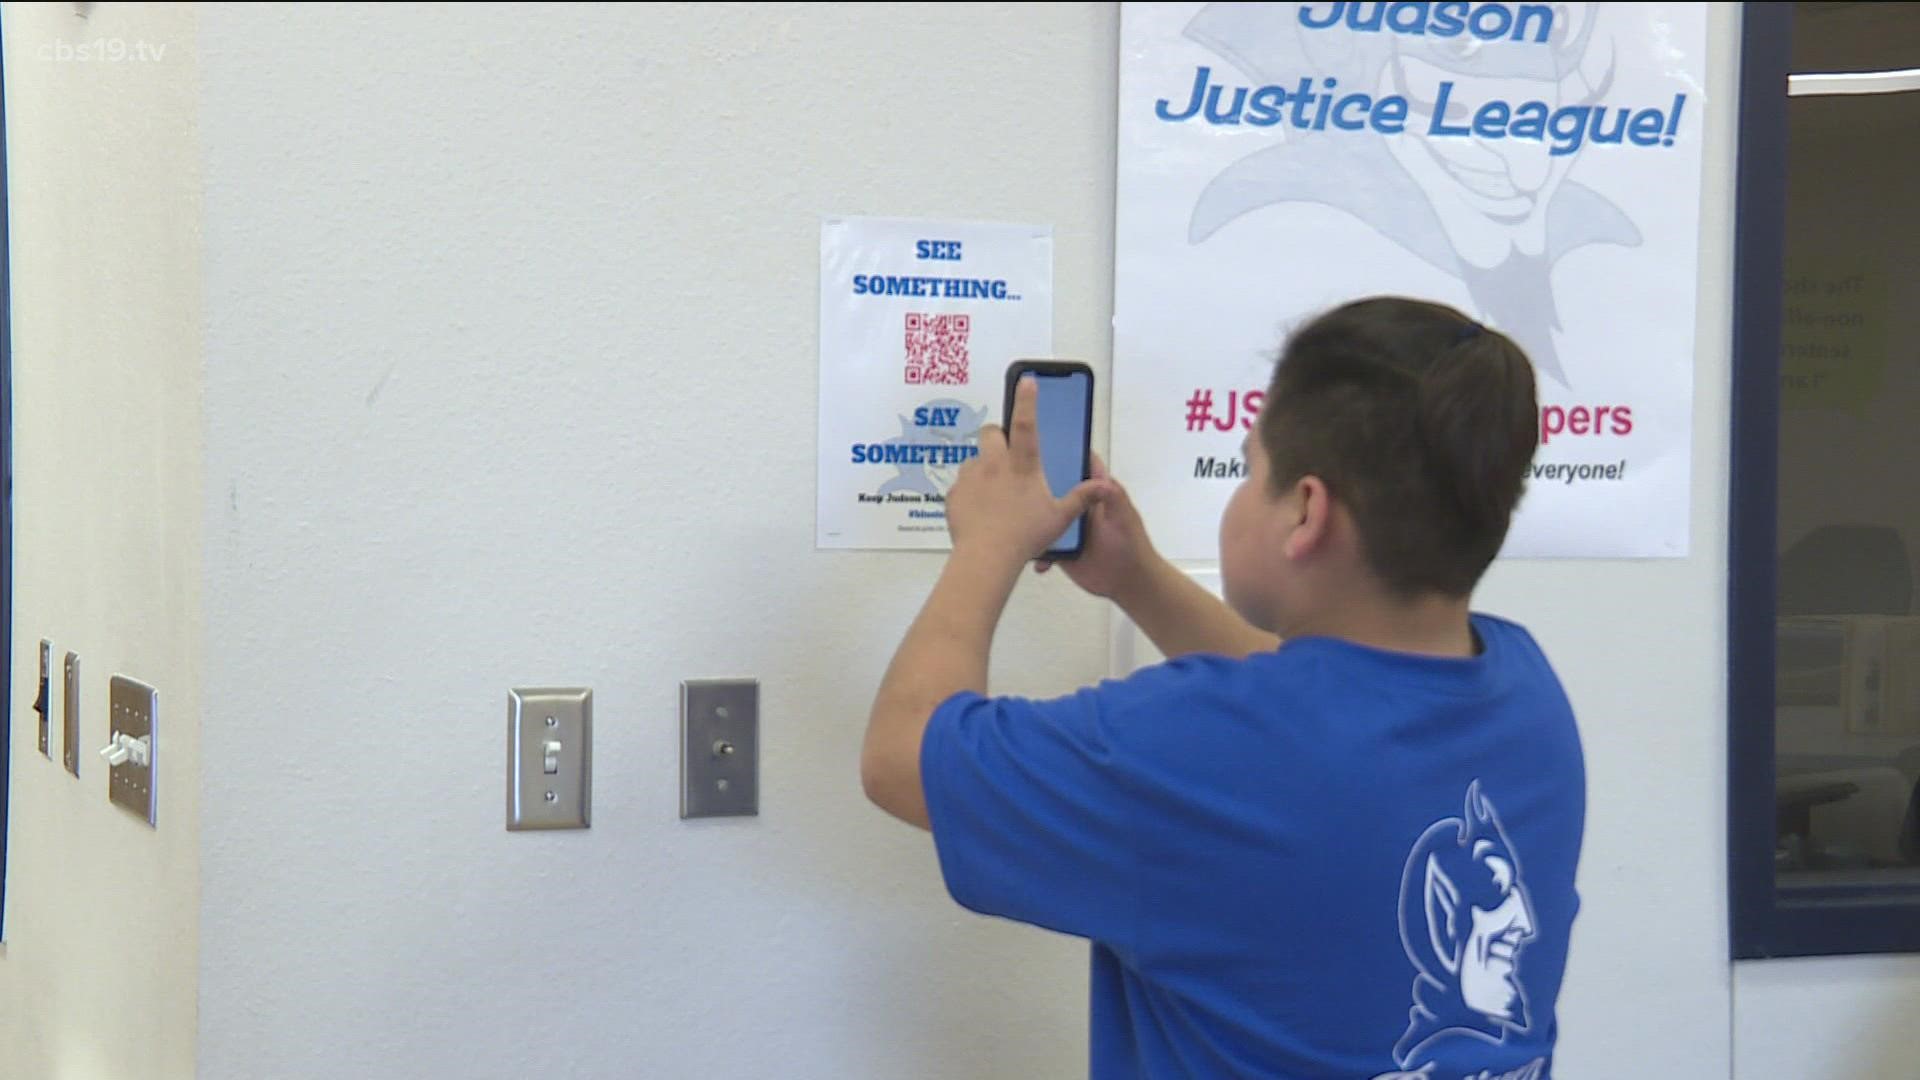 Judson STEAM Academy creates Judson Justice League, a student-involved initiative, and a QR code to combat viral tik tok trend.